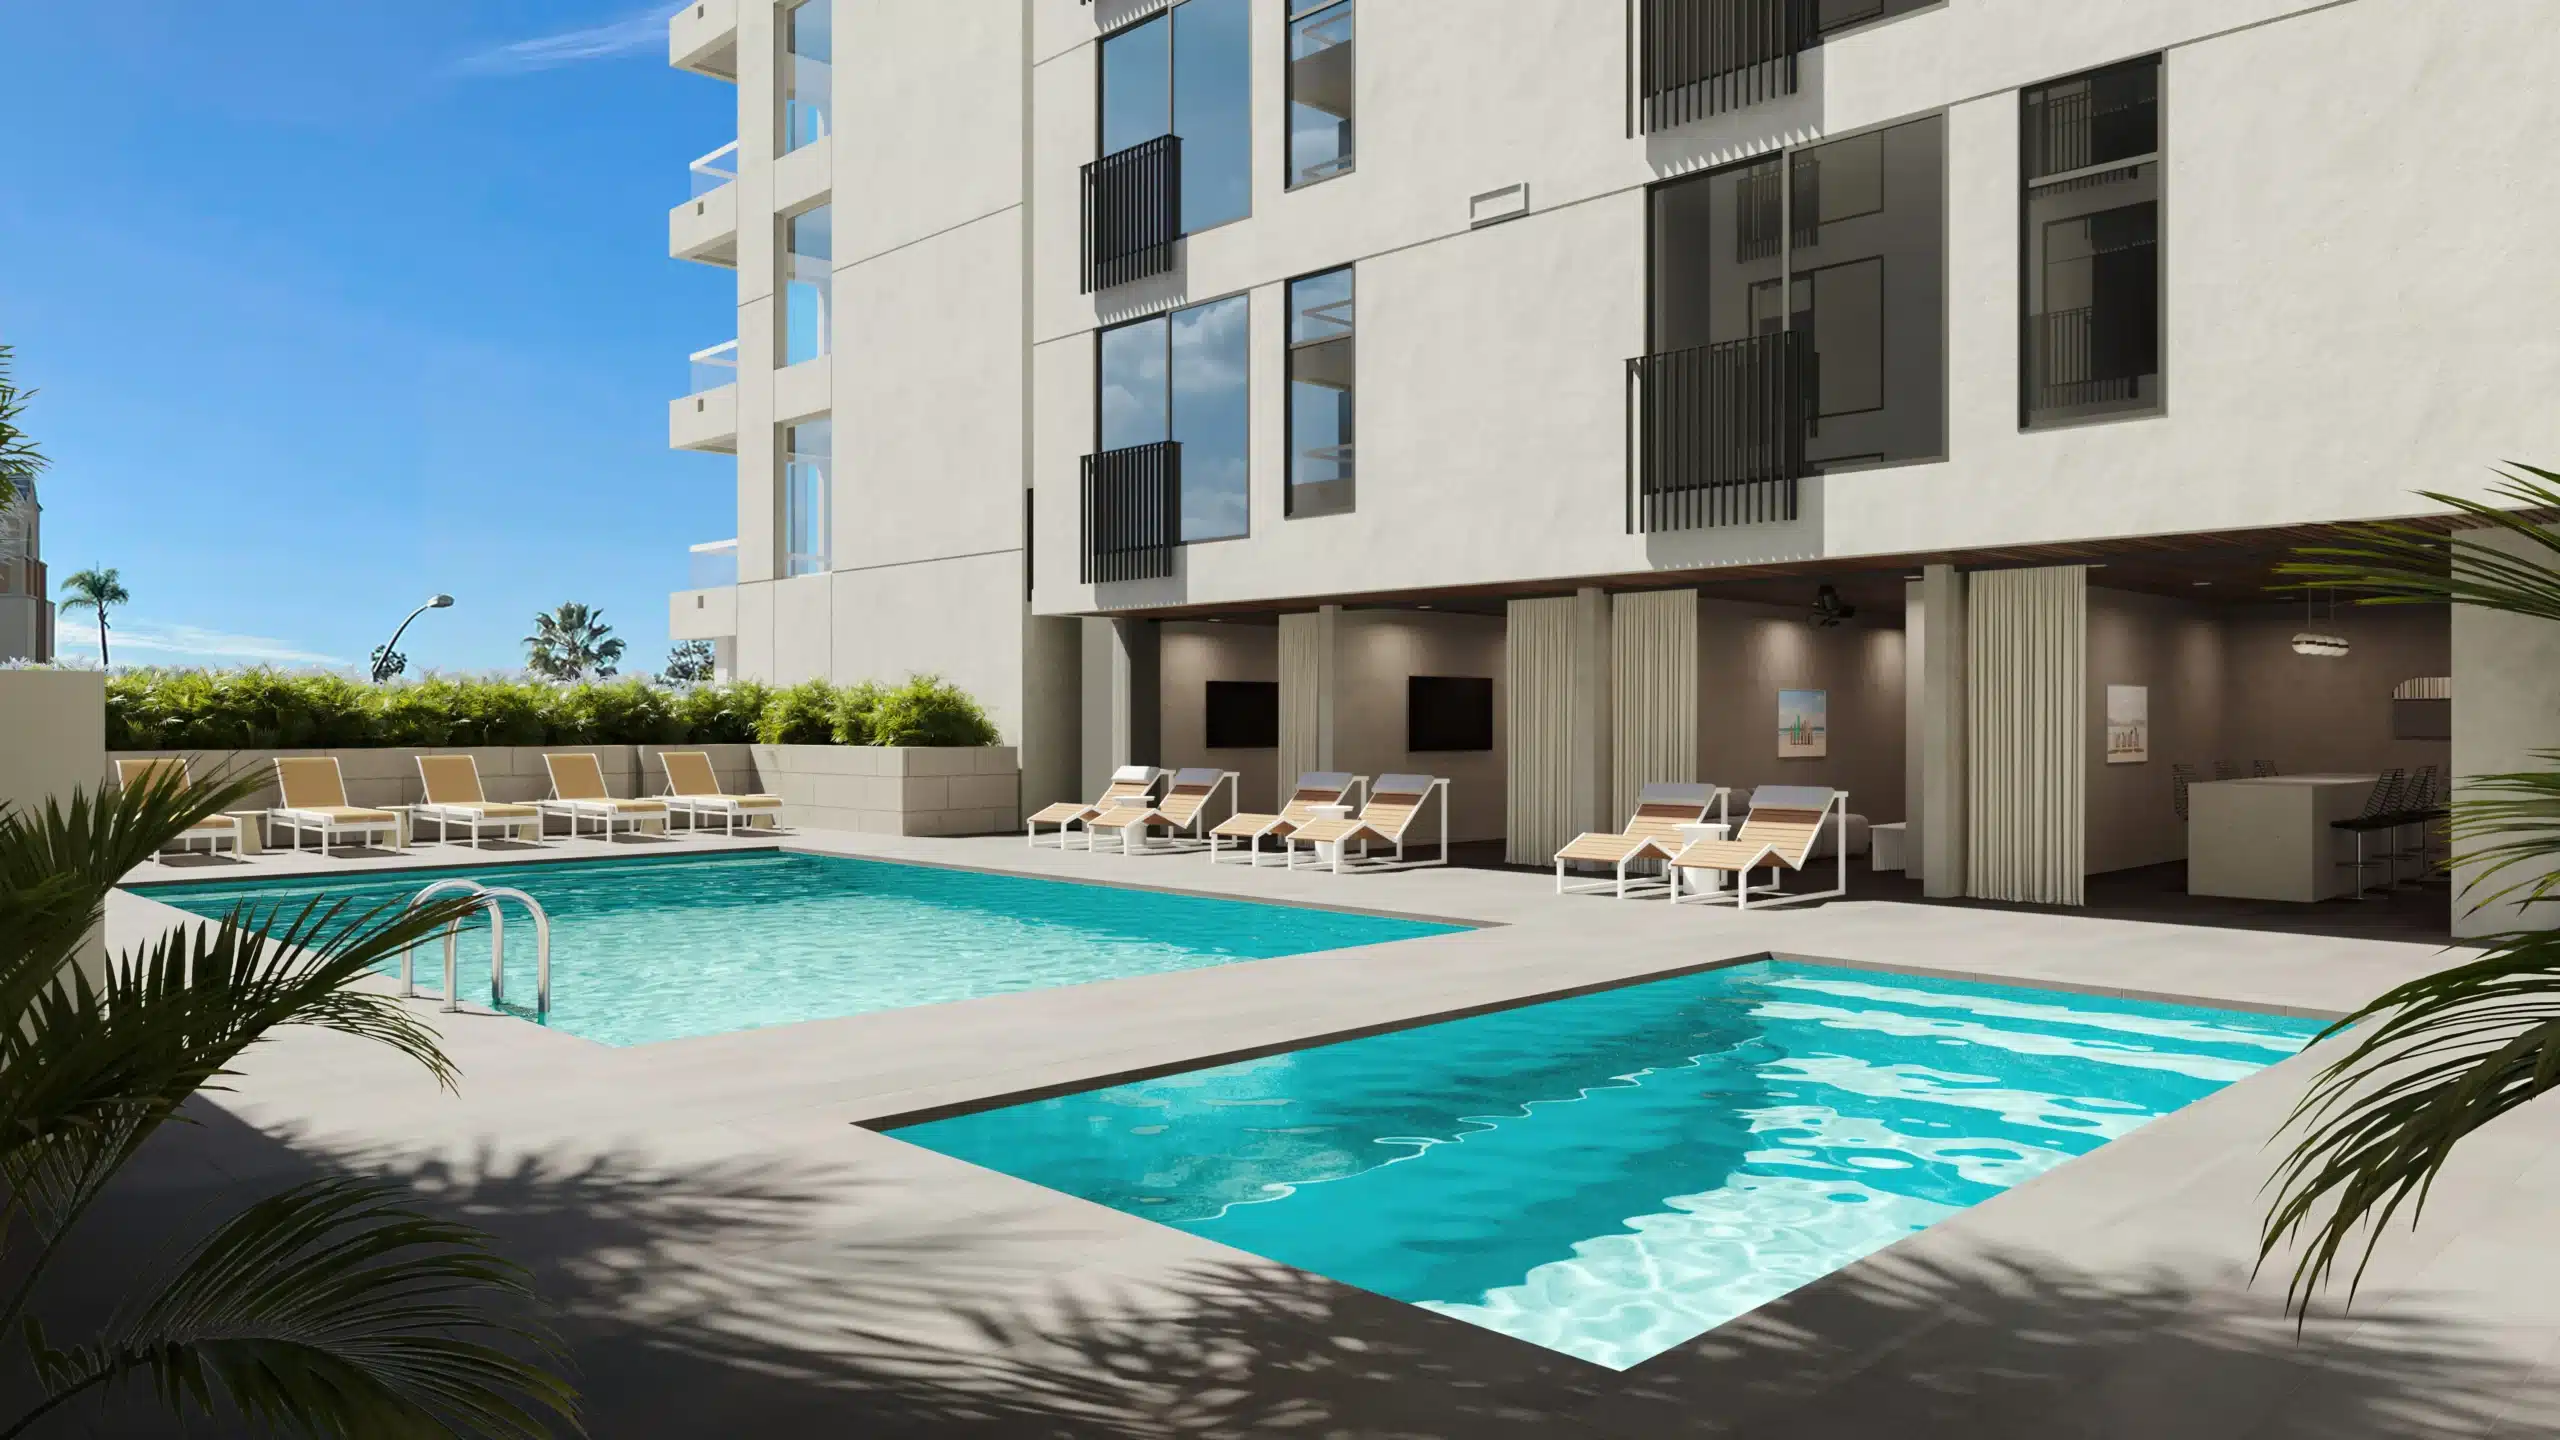 Elegant pool area with stylish lounge chairs at a high-end apartment complex in San Diego.